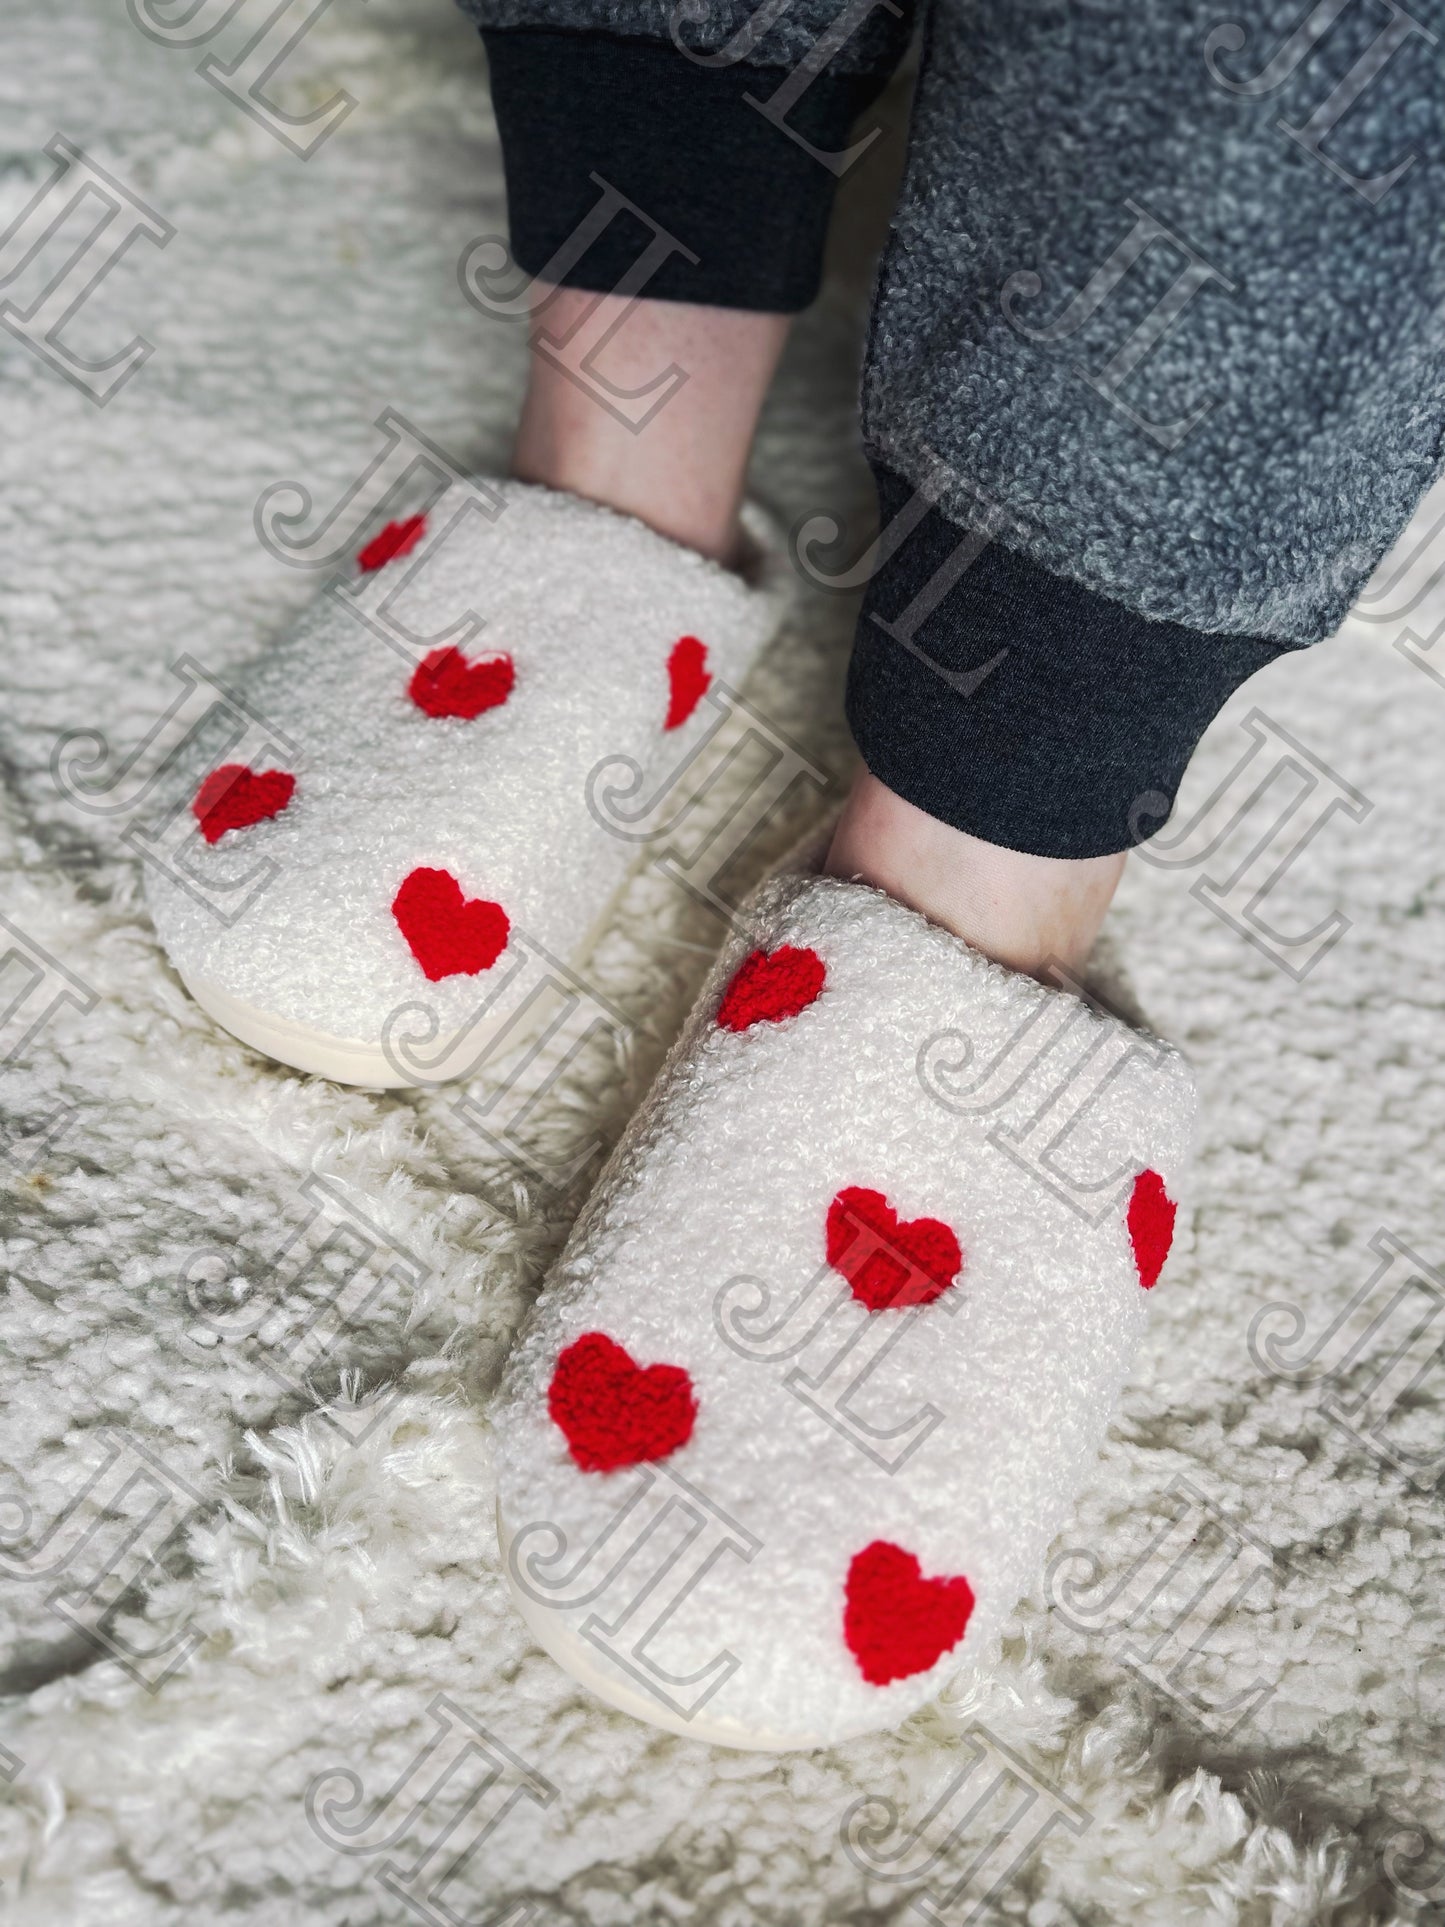 Red Heart Slippers